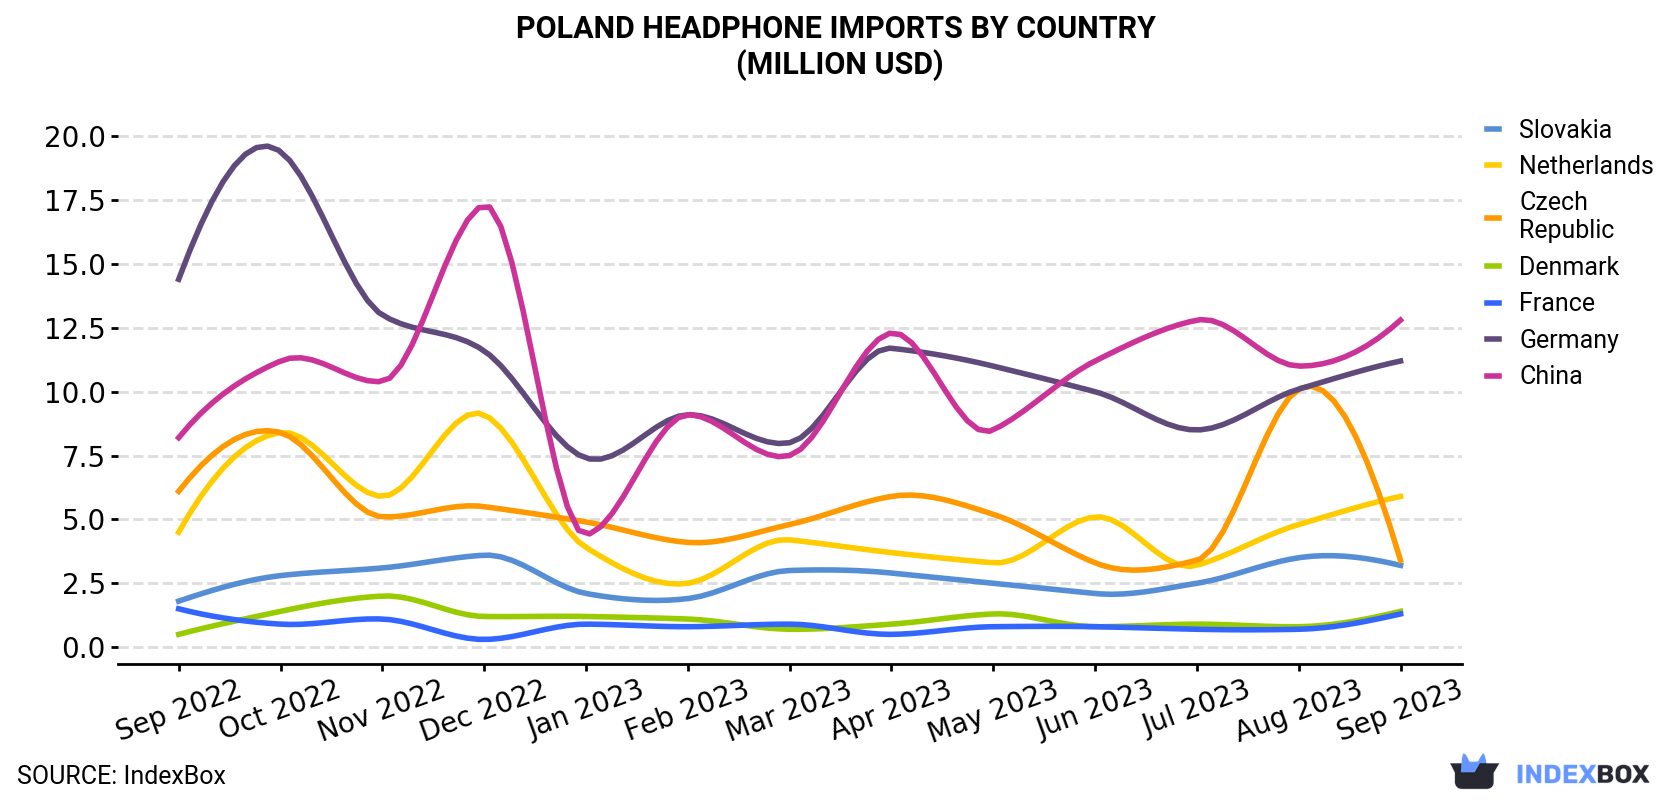 Poland Headphone Imports By Country (Million USD)